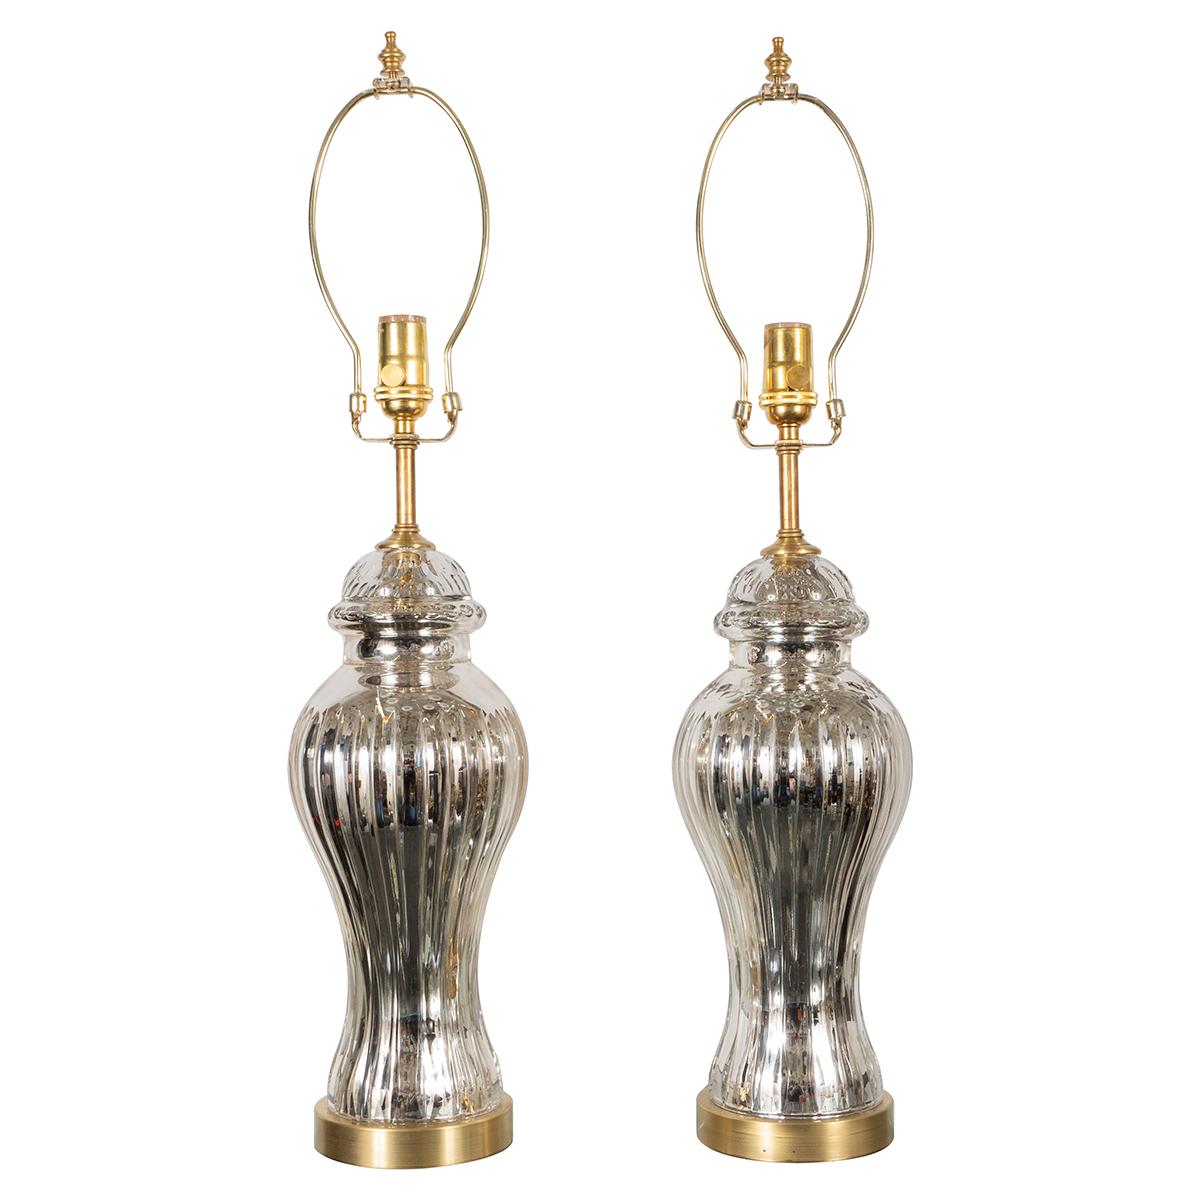 Pair of urn-shaped mercury glass lamps with vertical fluting and brass hardware.